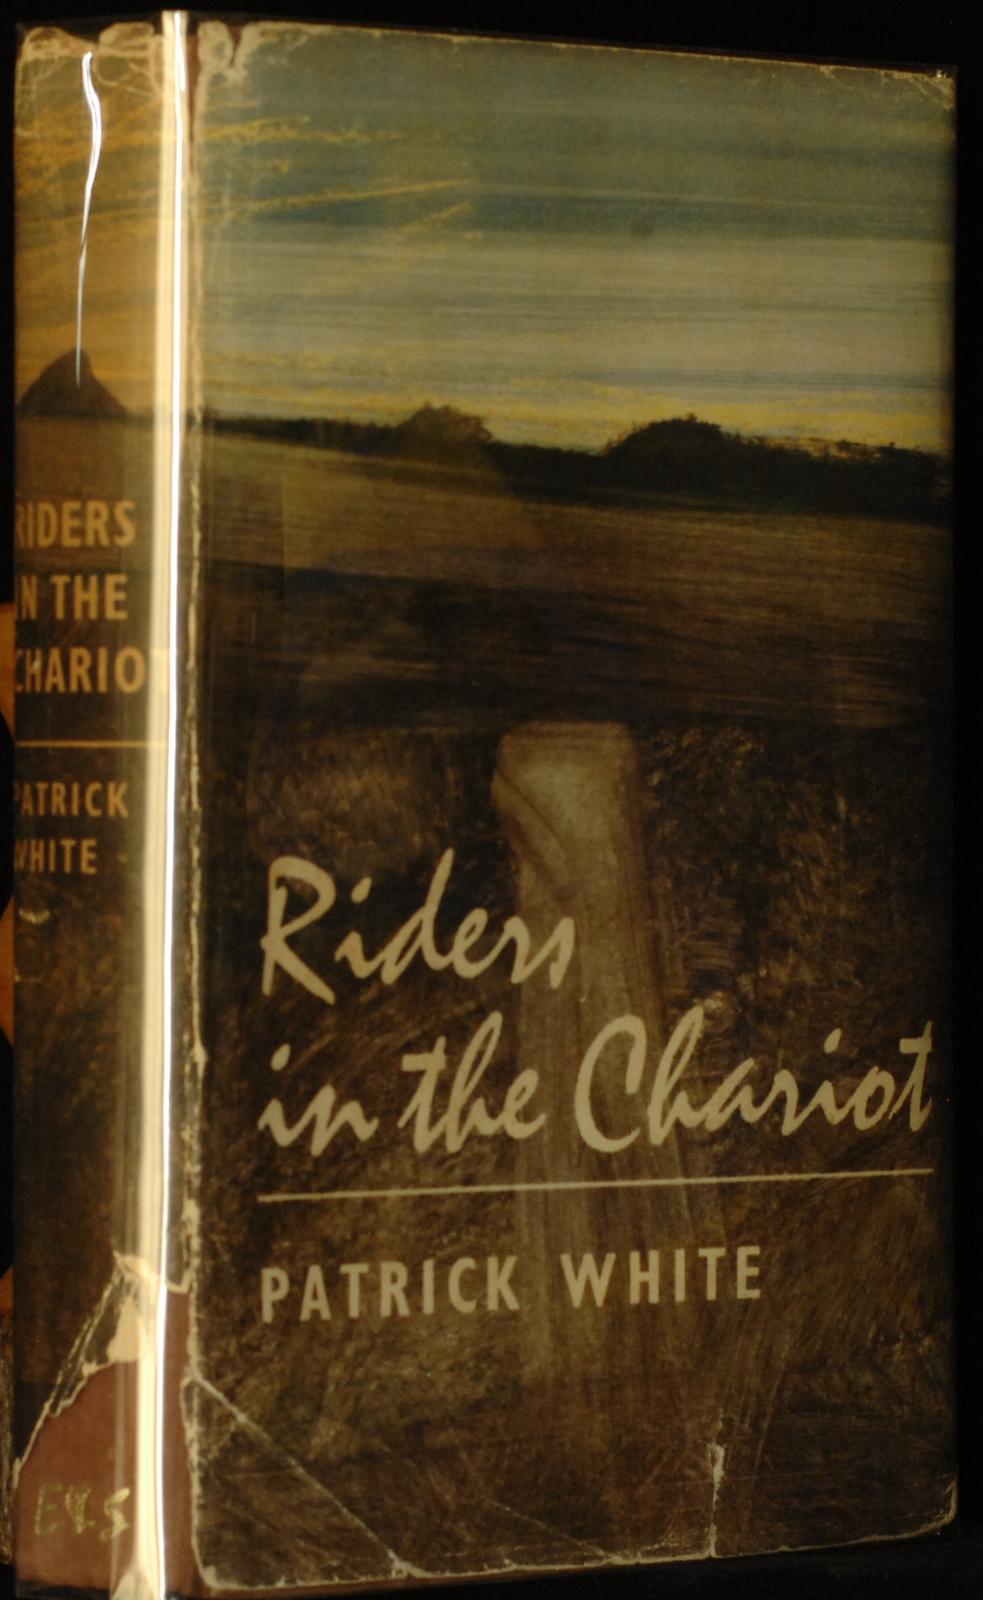 mbb005775b_-_White_Patrick_-_Riders_In_The_Chariot.jpg